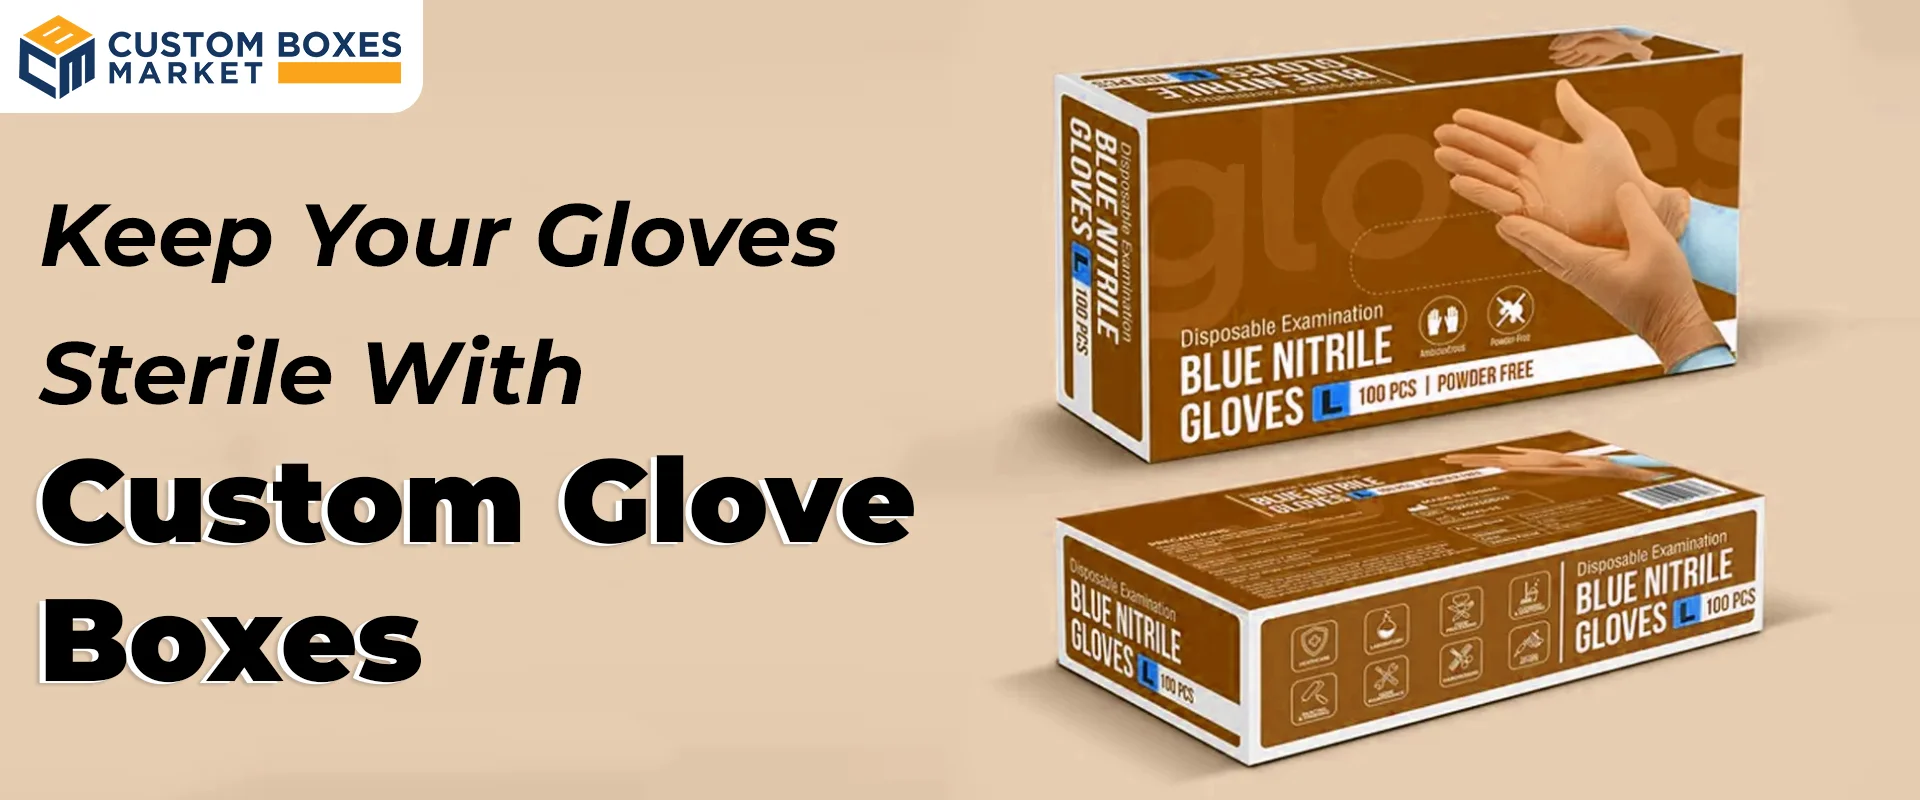 Keep Your Gloves Sterile With Custom Glove Boxes